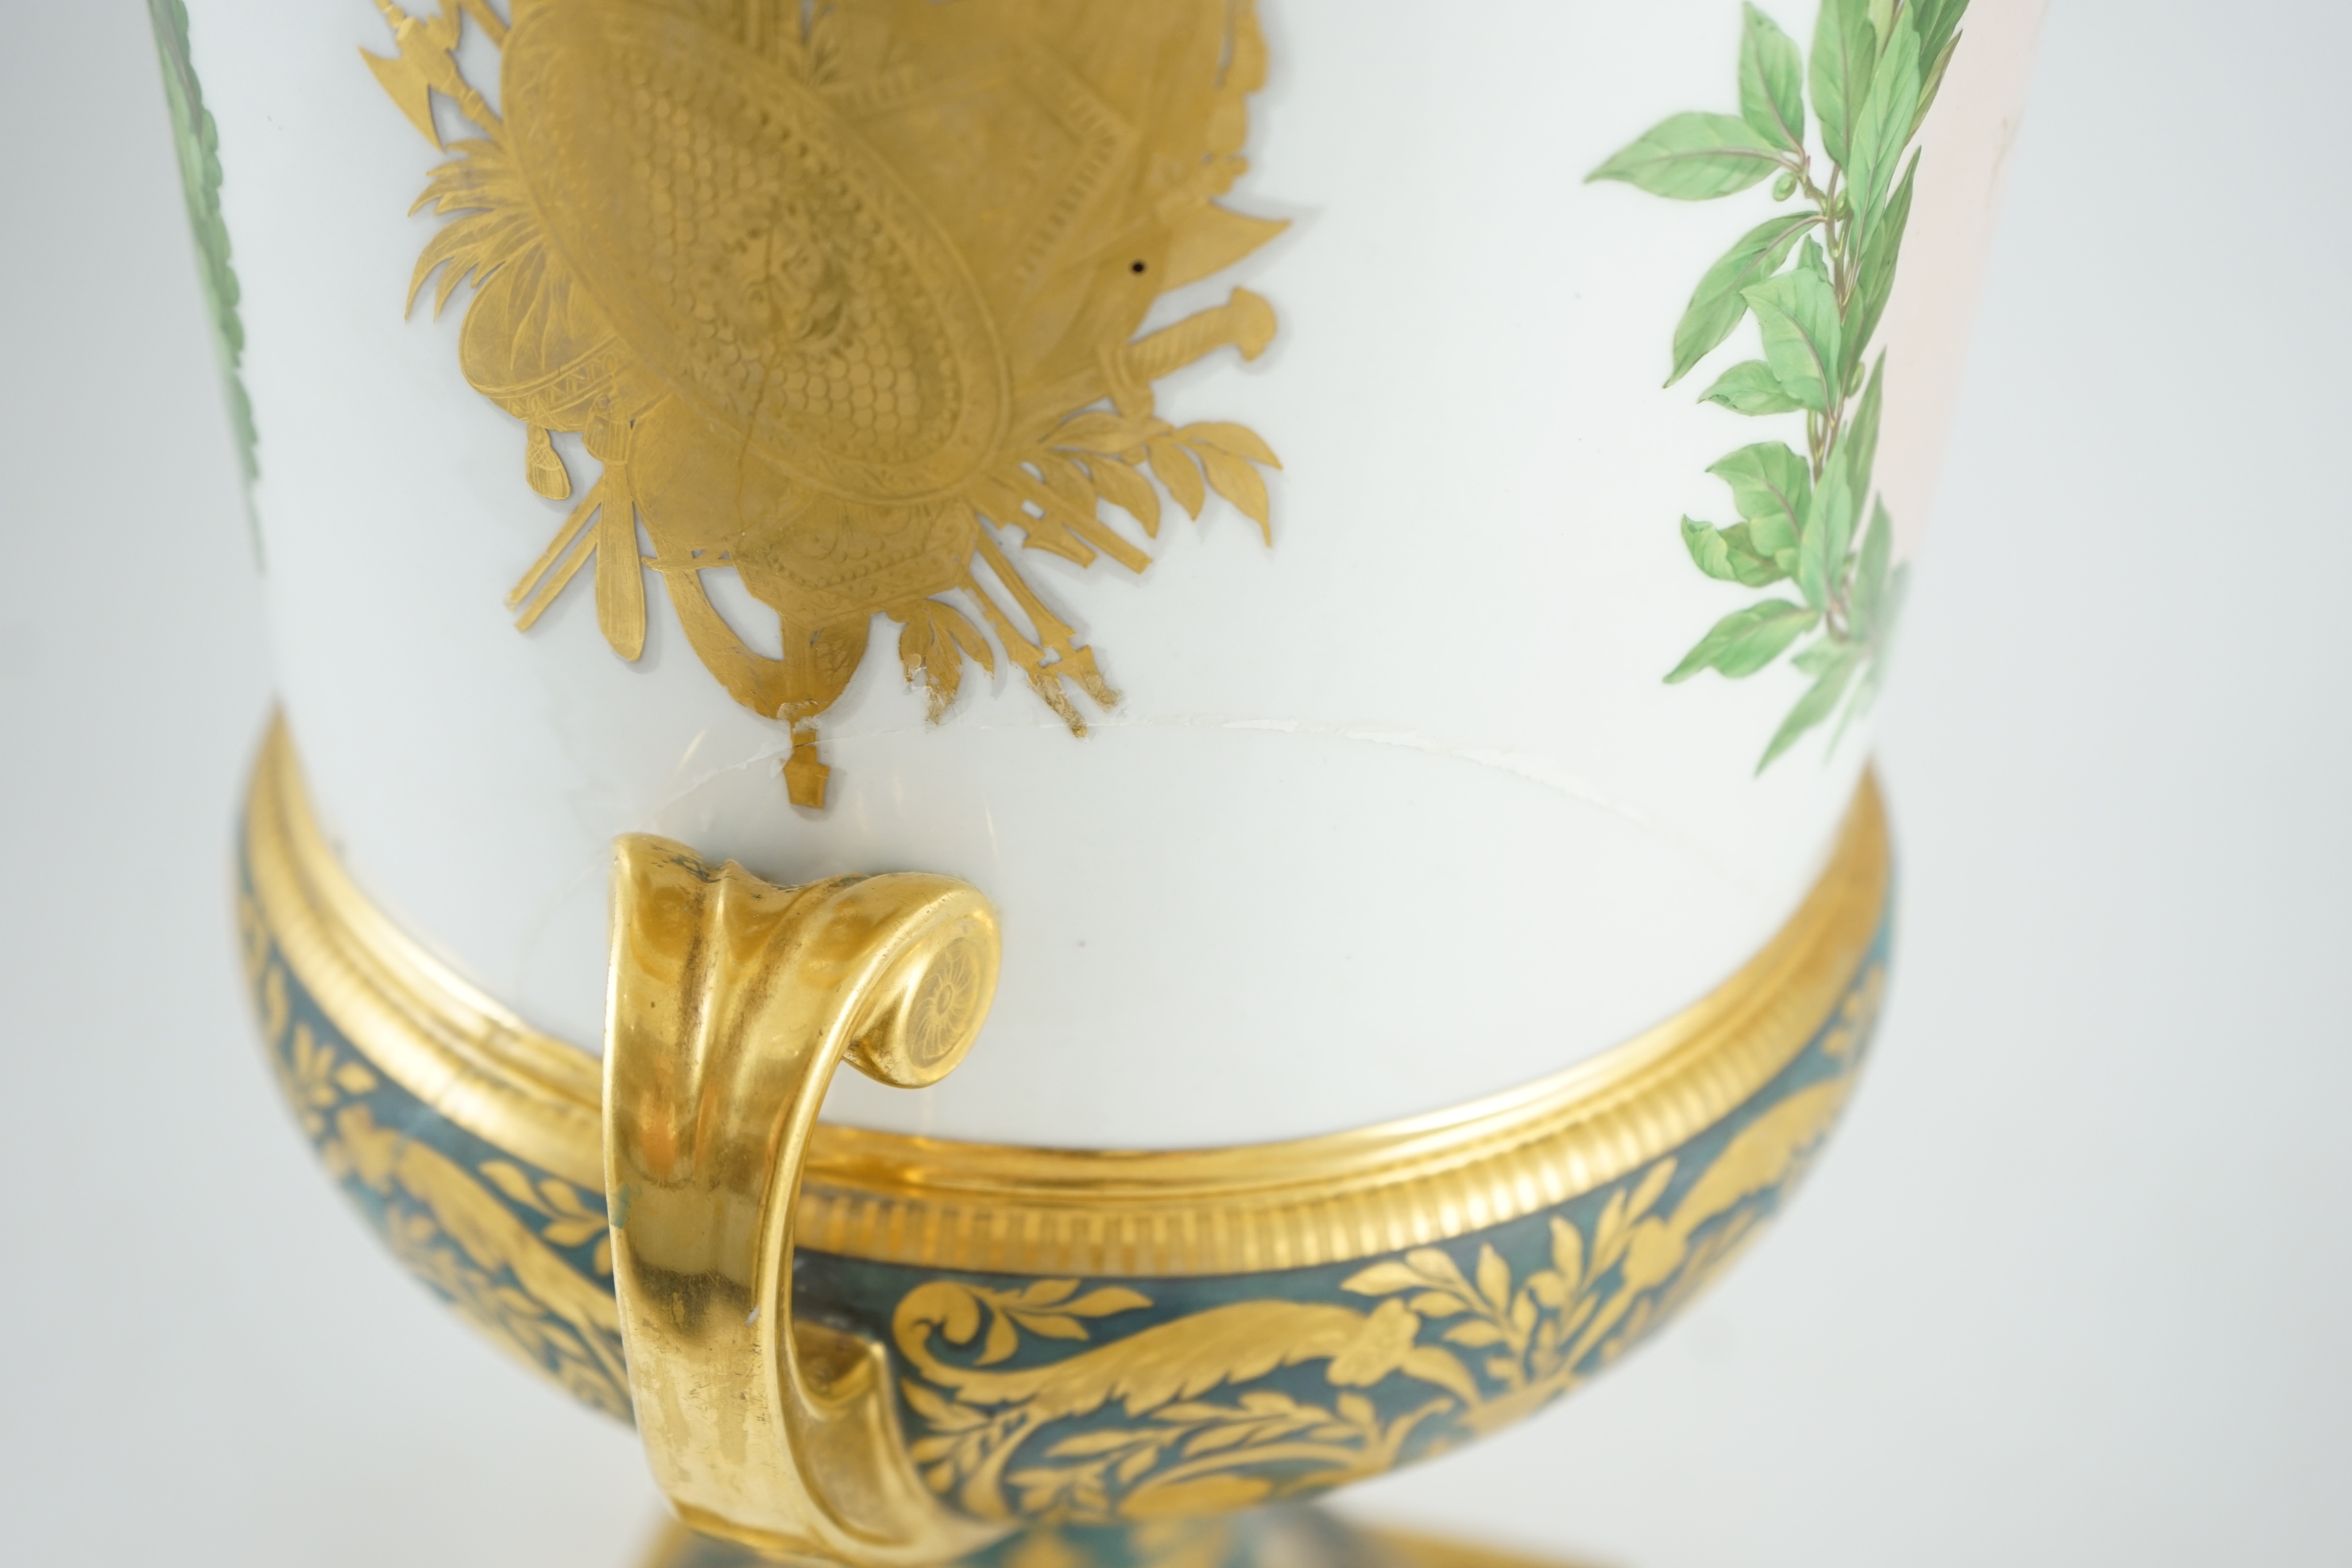 Napoleonic Wars interest: A large Berlin porcelain twin handled urn, c.1816, presented to Sir Henry Hardinge (1785-1856) by the Prussian Prince-General Blücher (1742-1819), 49cm high